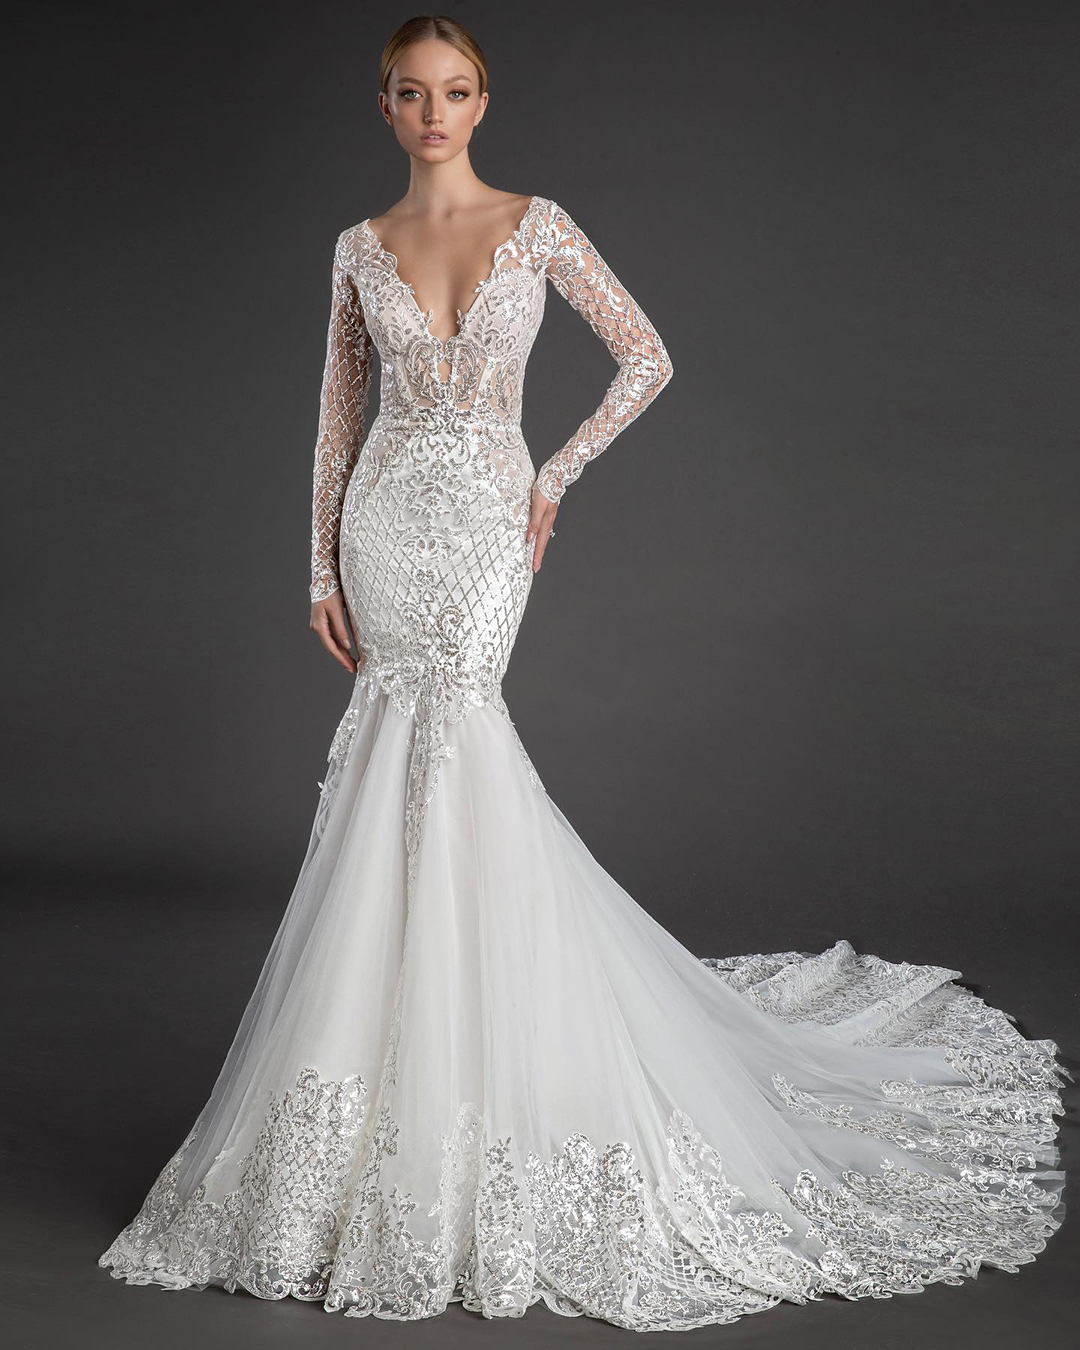 vintage inspired wedding dresses with long sleeves lace sexy fit and flare pninatornai